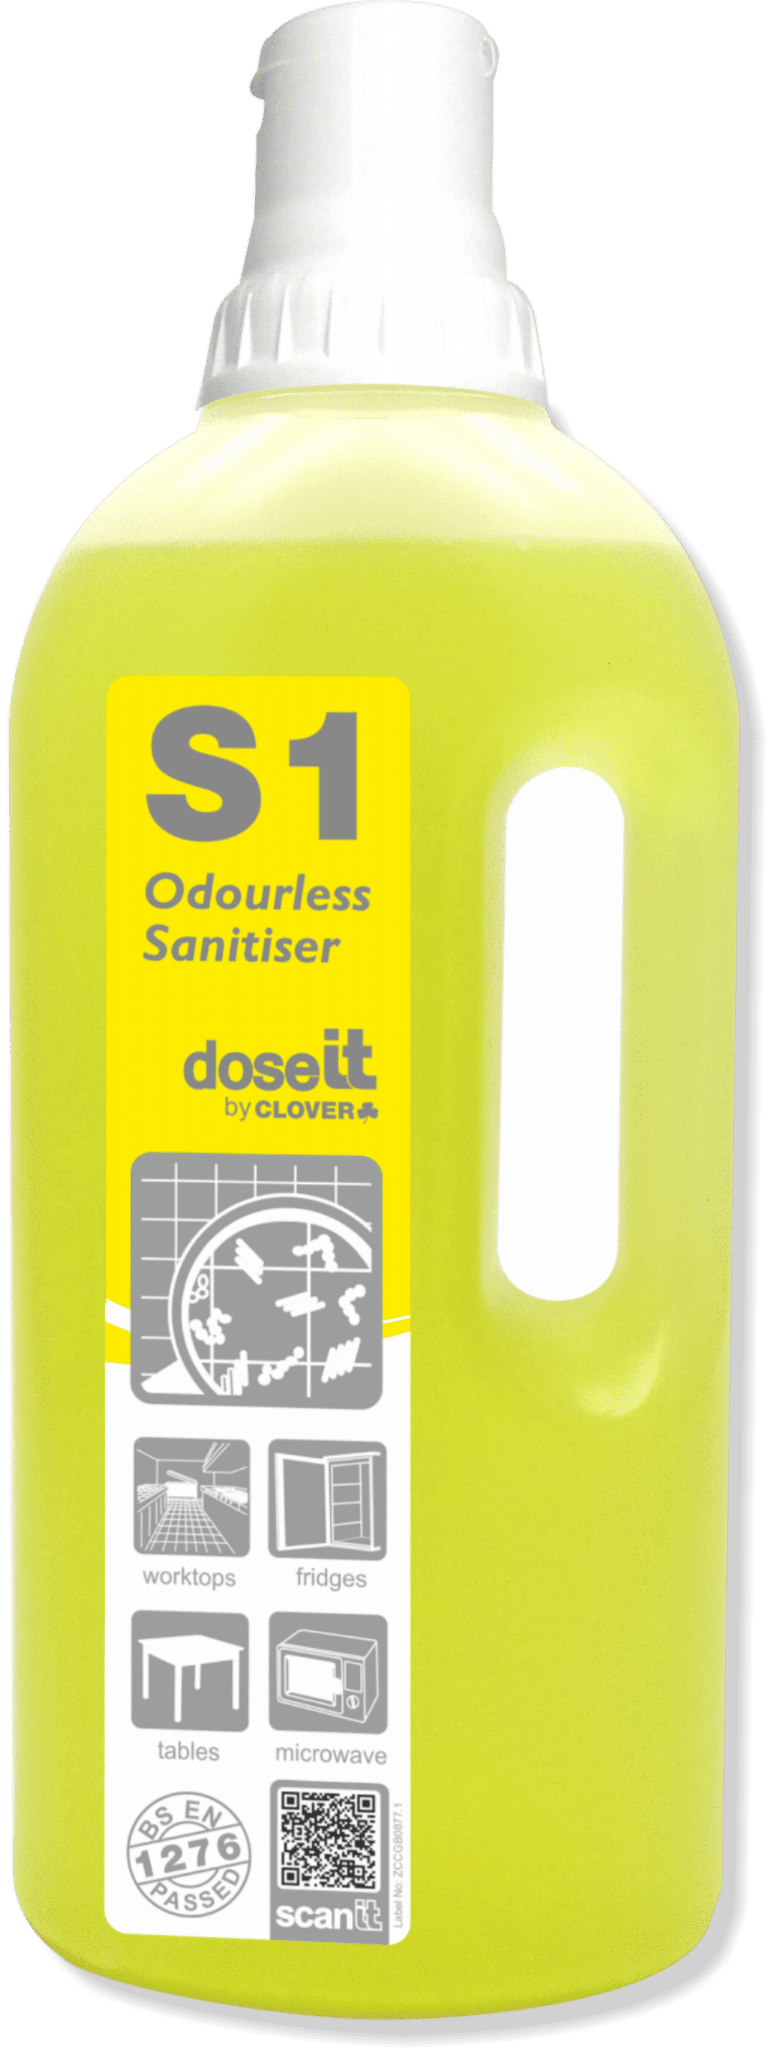 Clover Chemicals Dose It S1 Hard Surface Cleaner & Sanitiser (225) – 8 x 1 Ltr – North Star Supplies